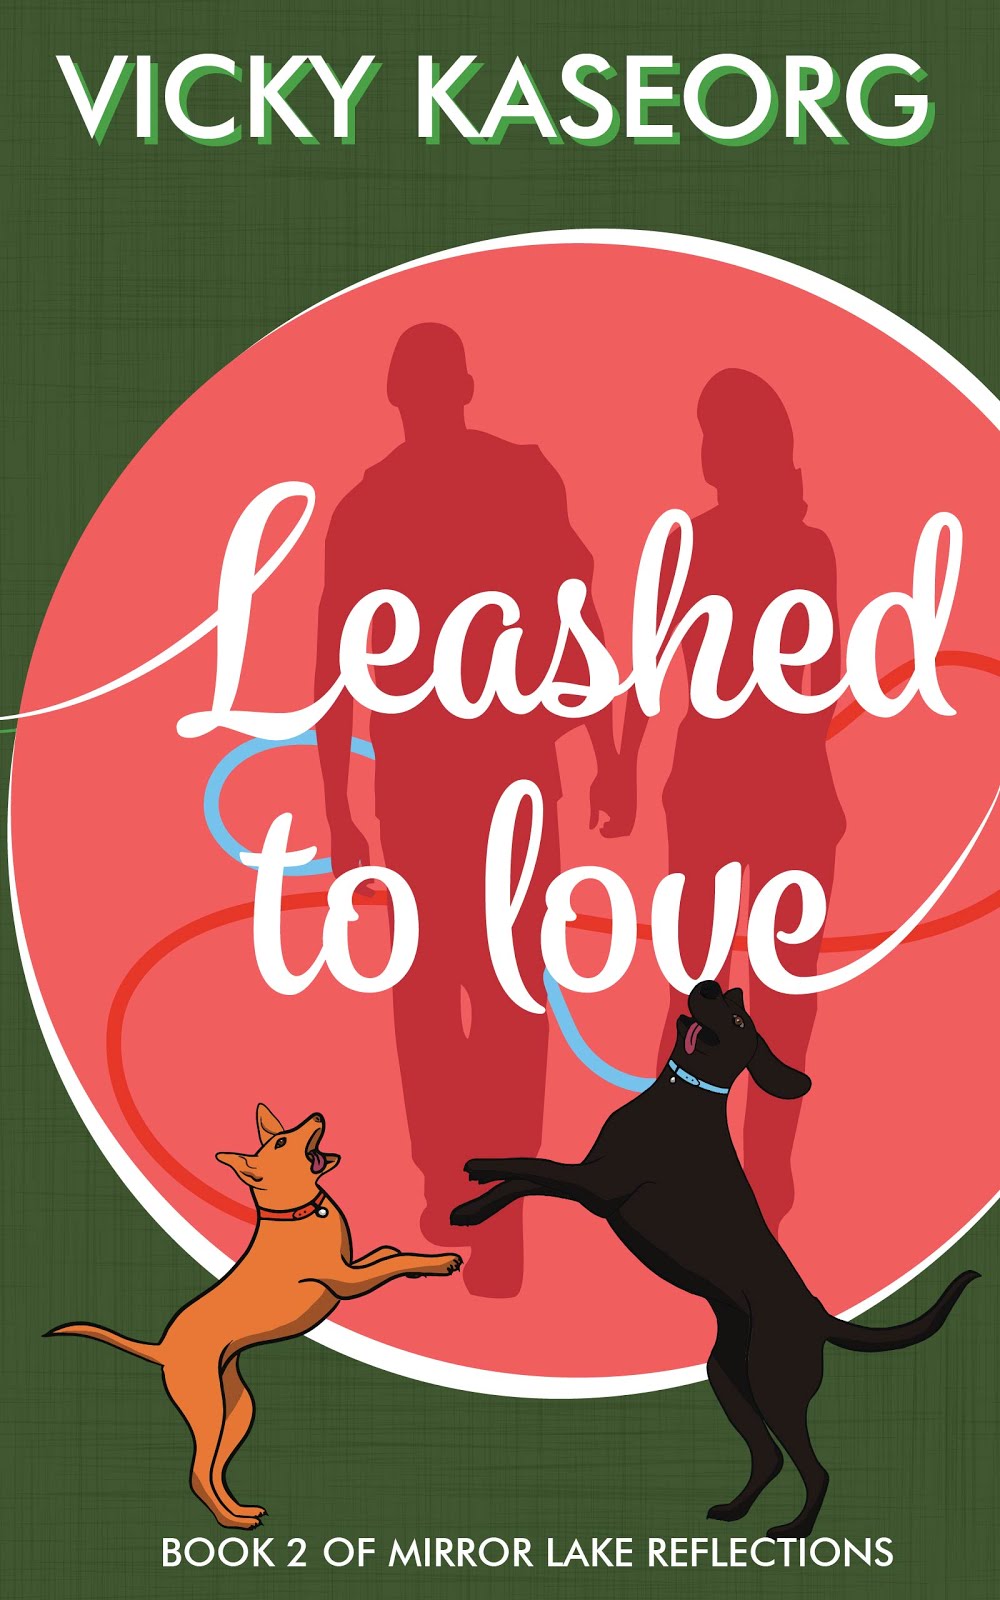 Leashed to Love